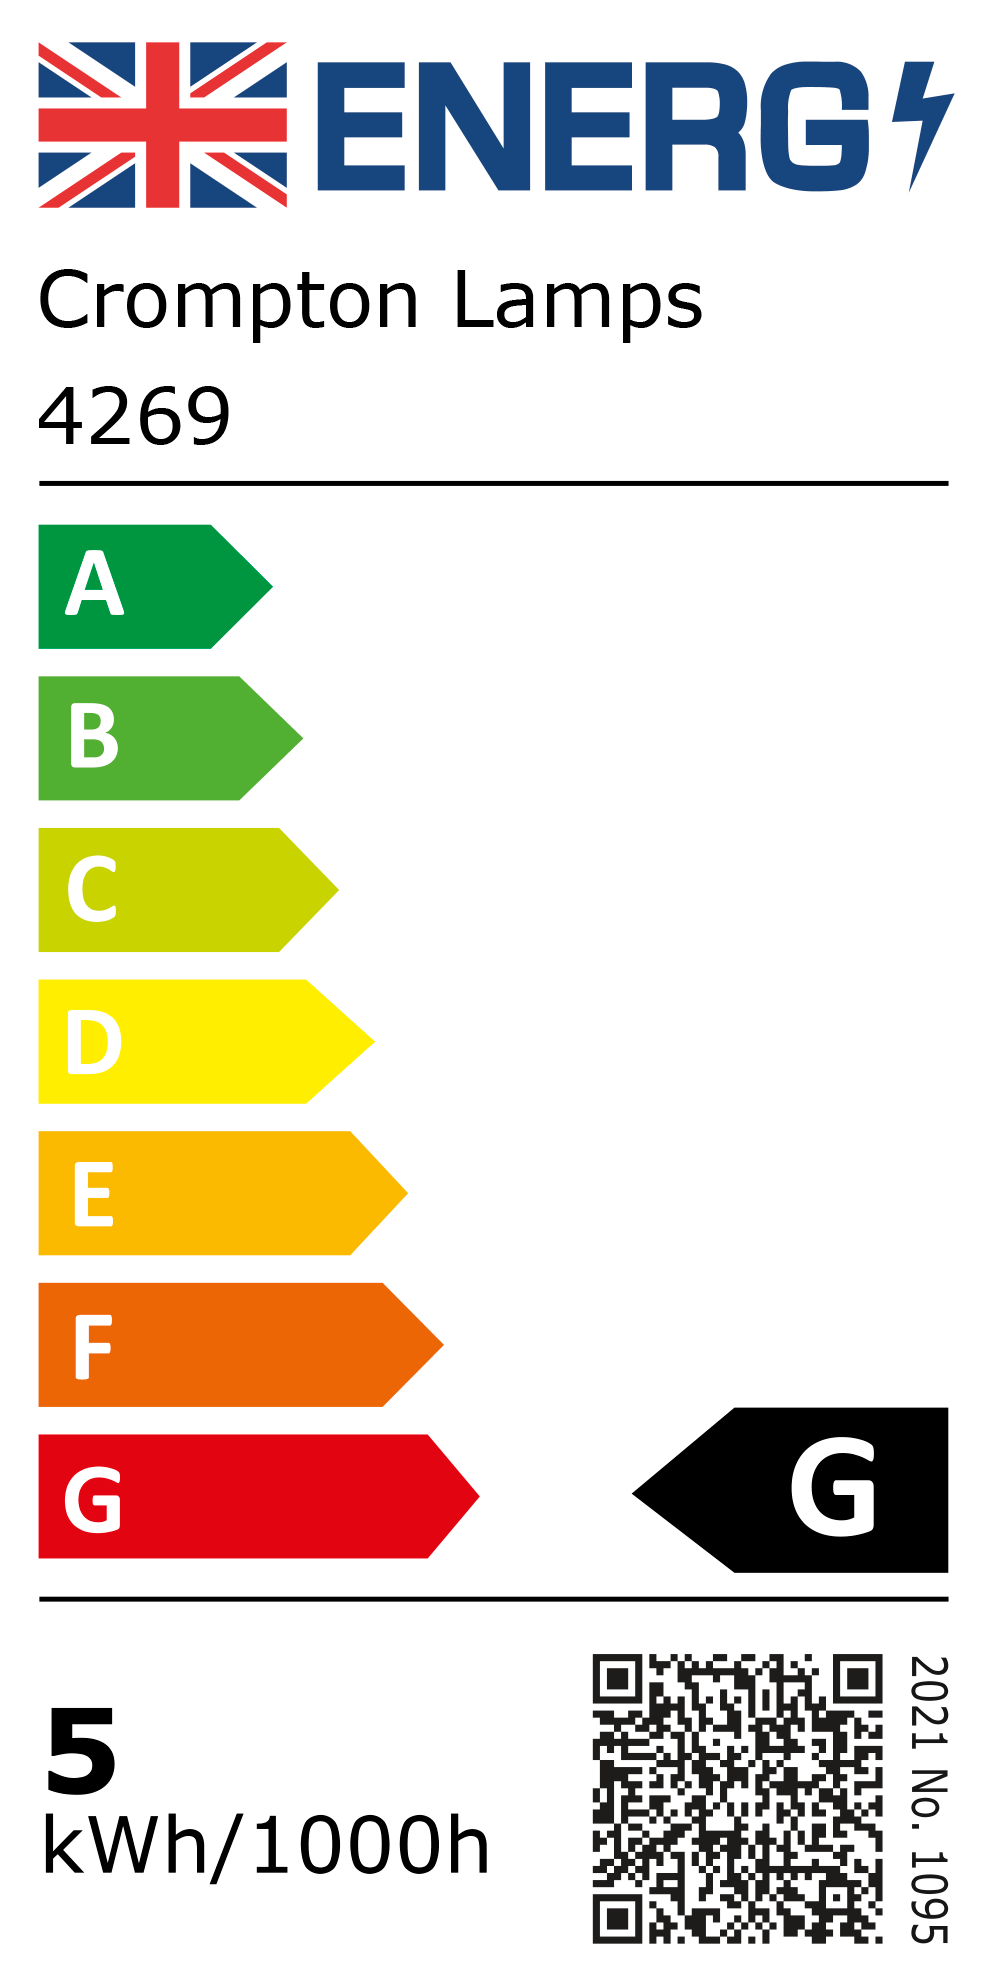 New 2021 Energy Rating Label: Stock Code 4269